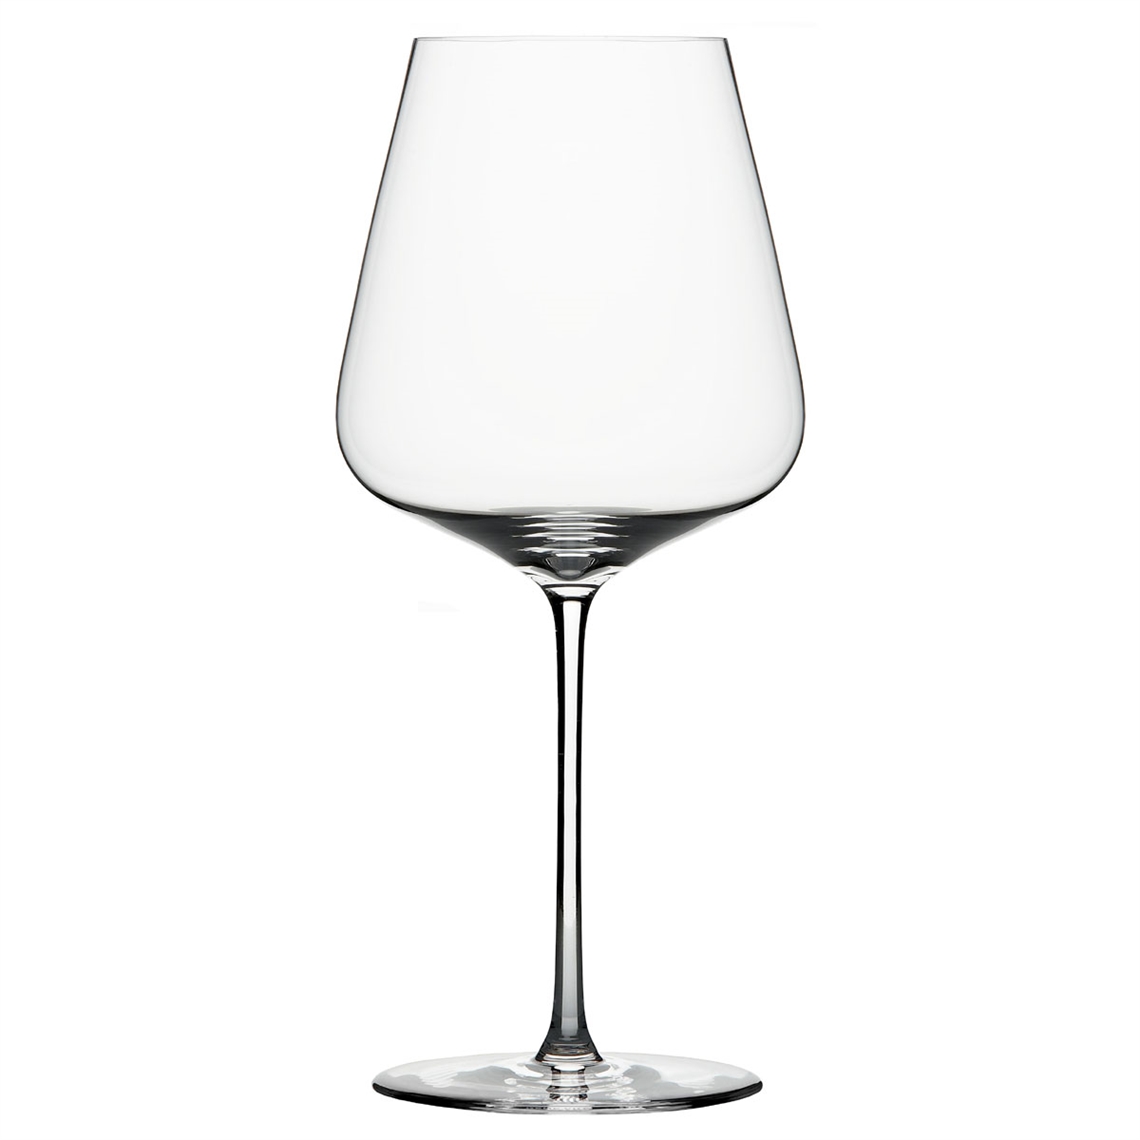 View more restaurant & trade glasses from our Premium Mouth Blown Glassware range